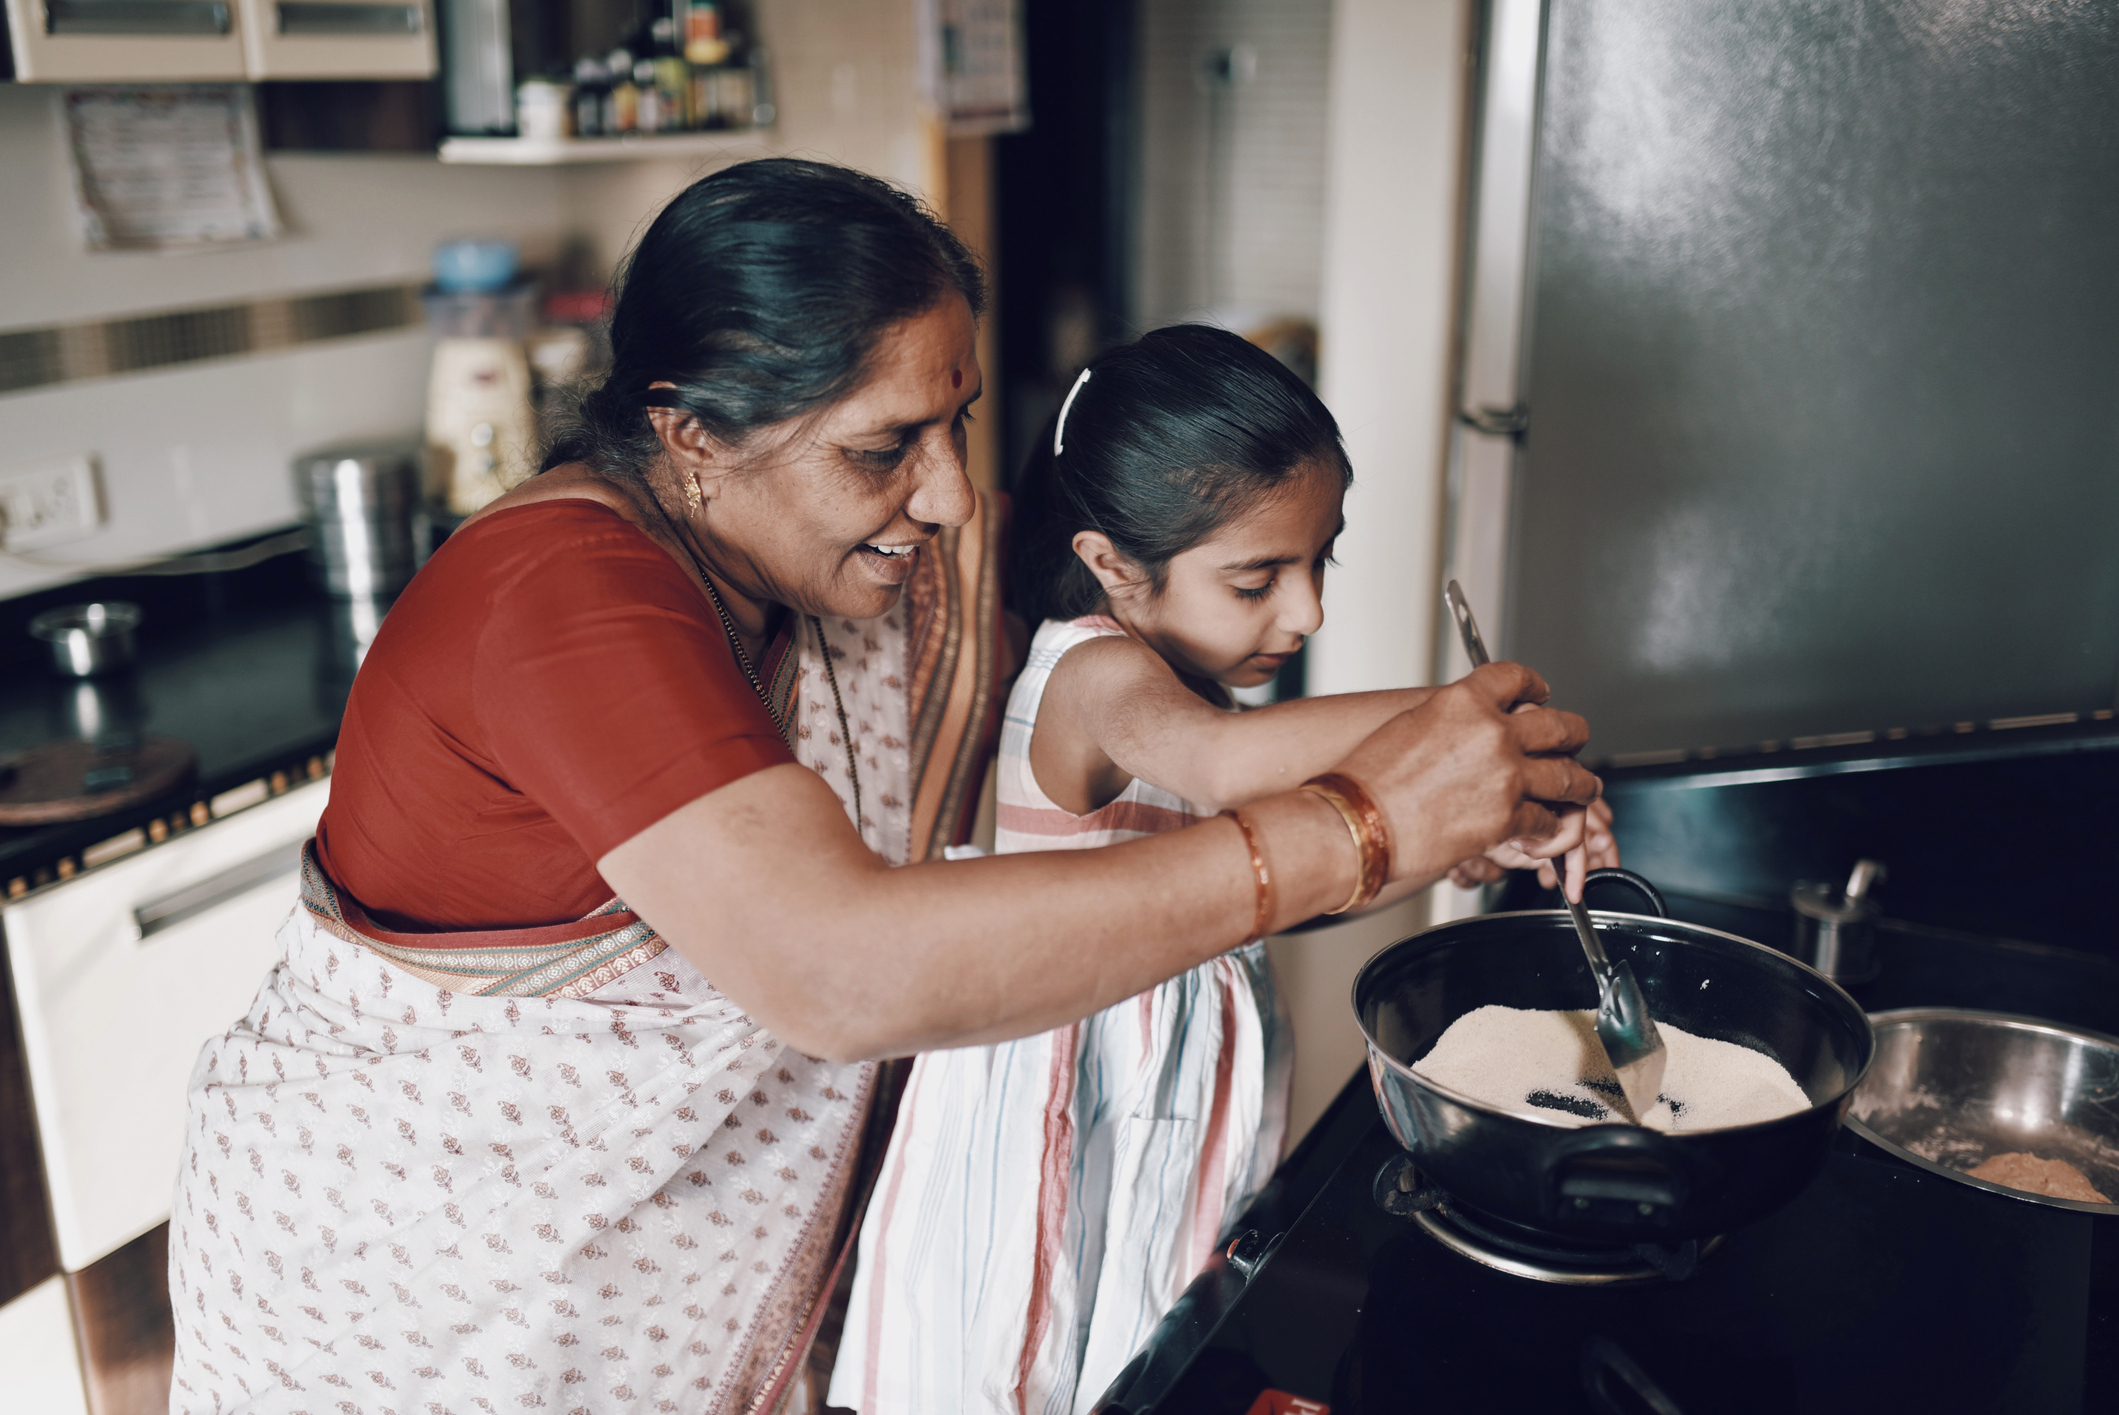 A grandmother and granddaughter cooking together in a kitchen